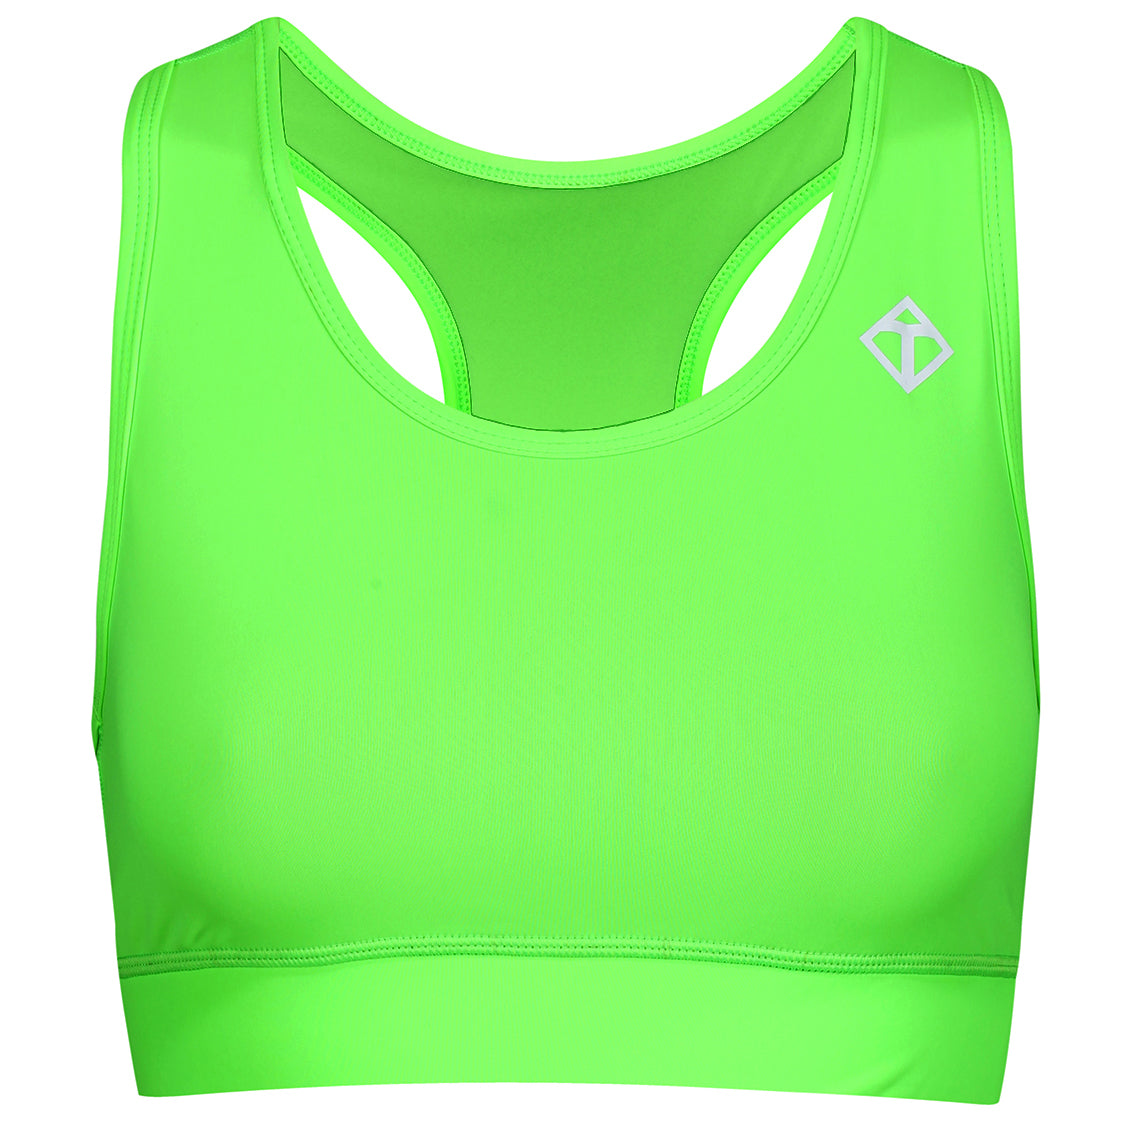 BossFitted Neon Green and Black Padded Sports Bra